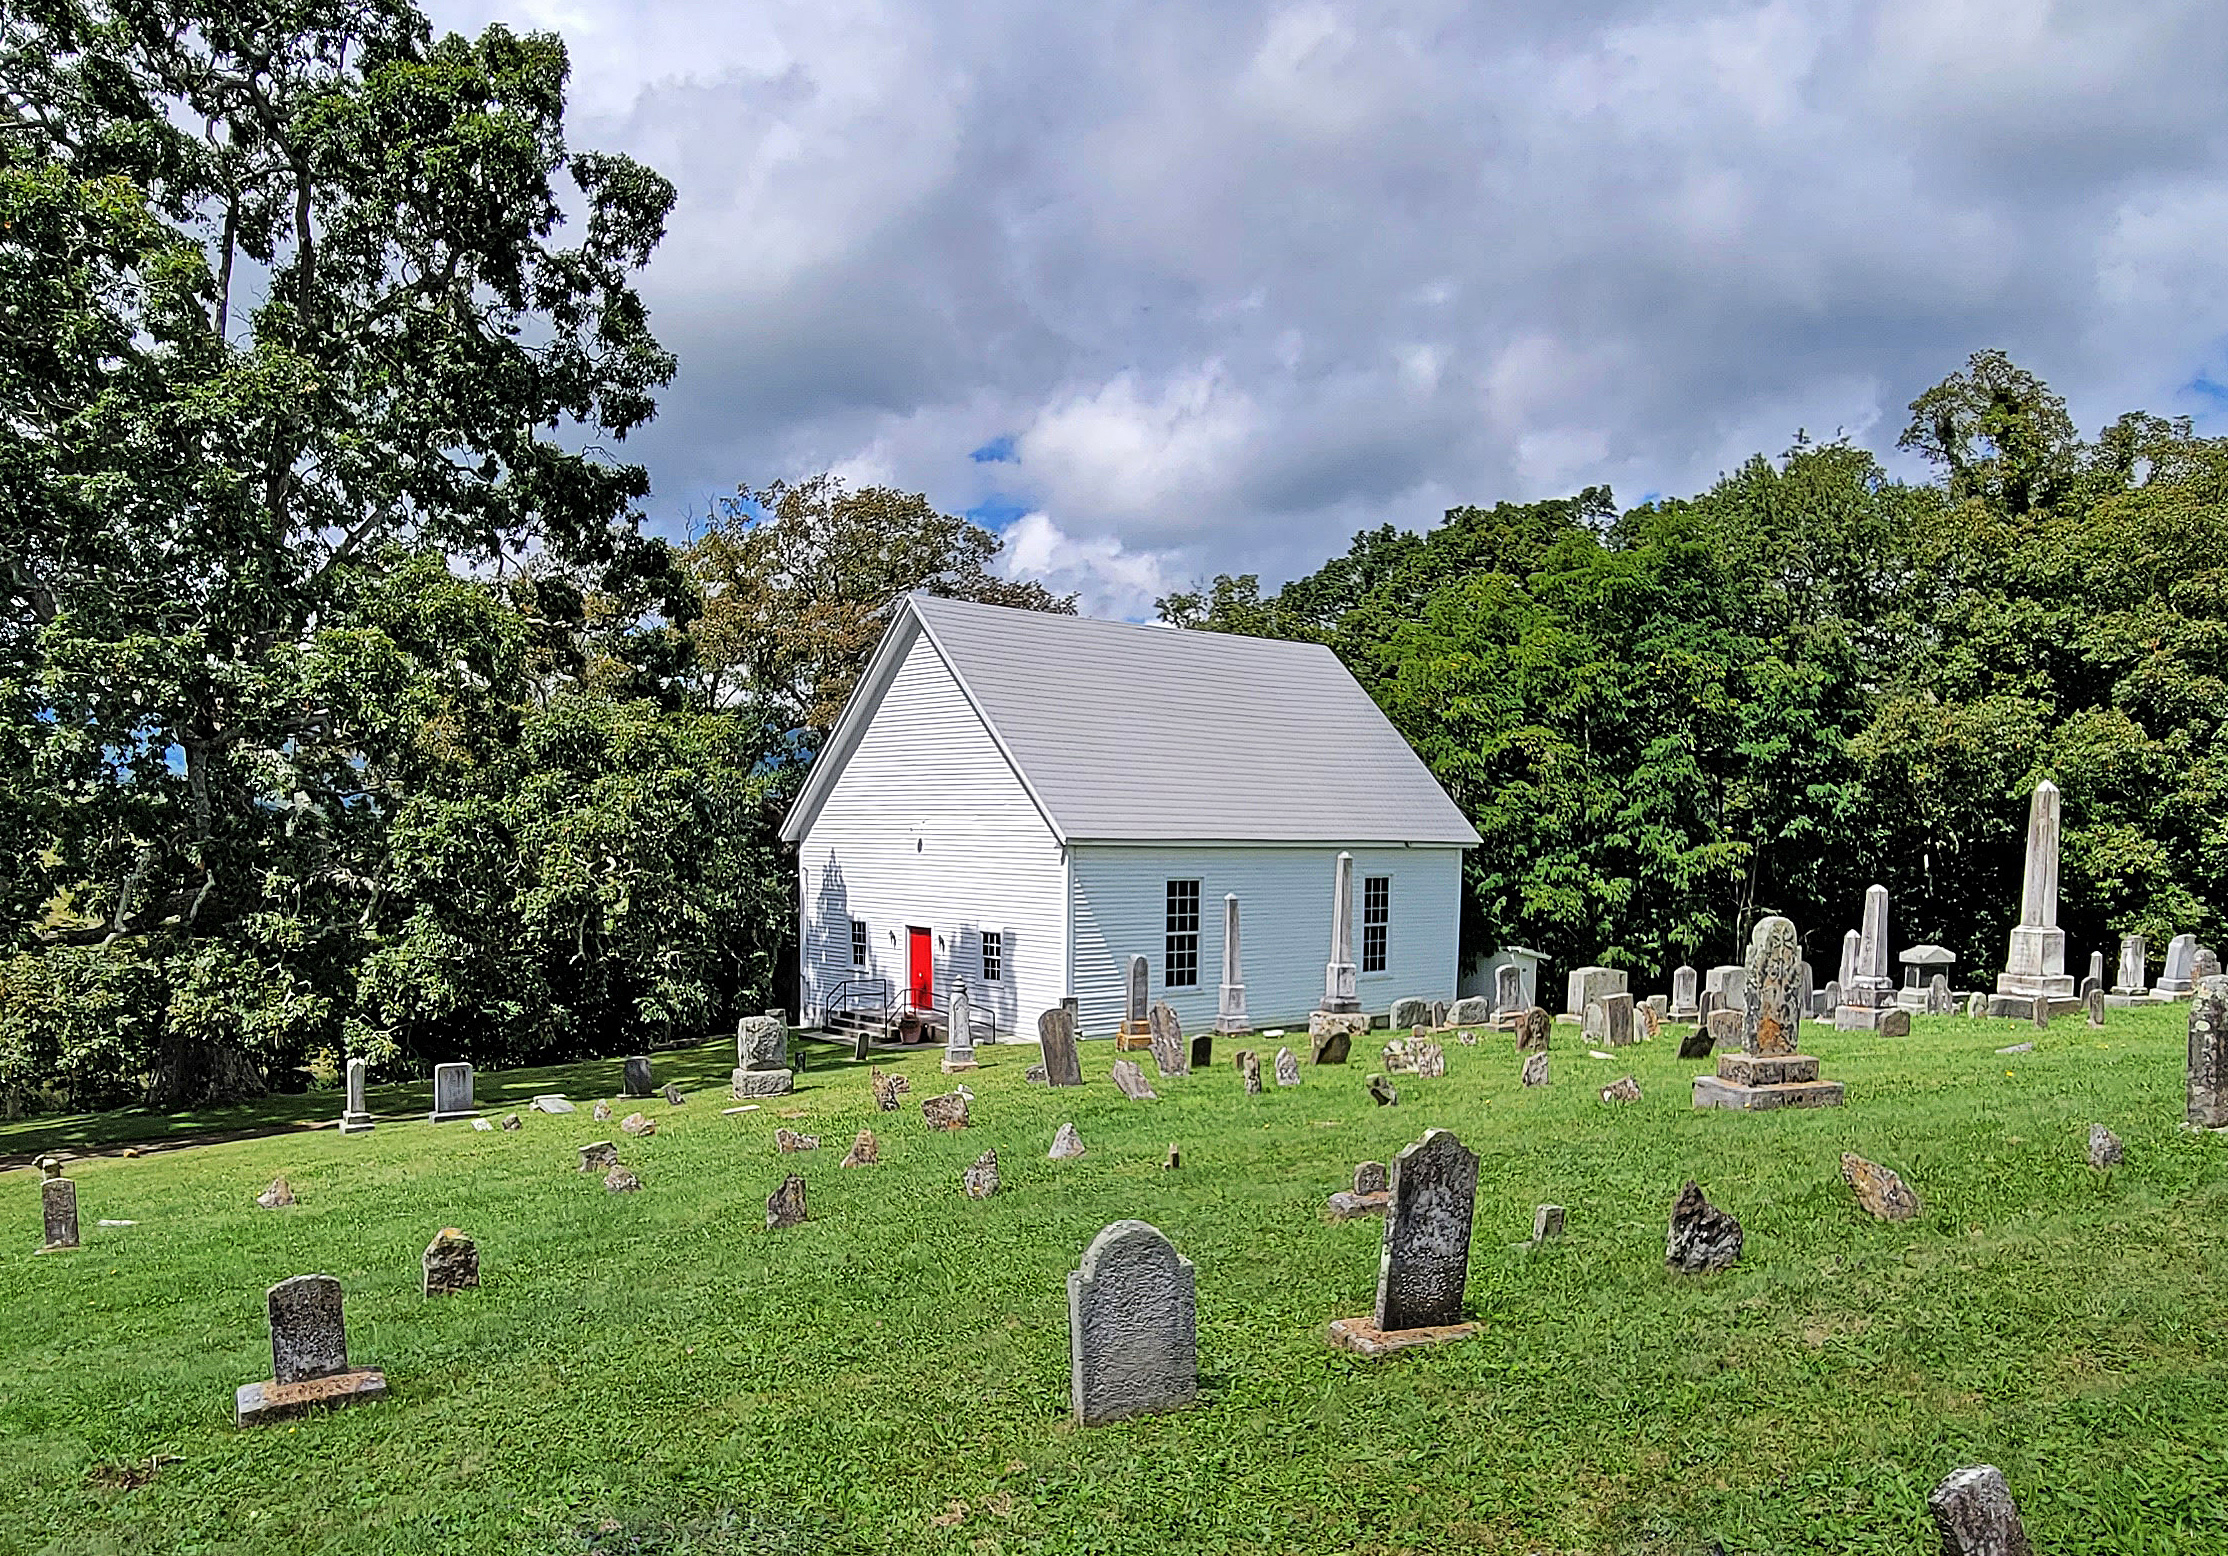 092-0014_Burkes_Garden_Central_Church_and_Cemetery_2022_church-and-cemetery_setting_NW_view_VLR_Online